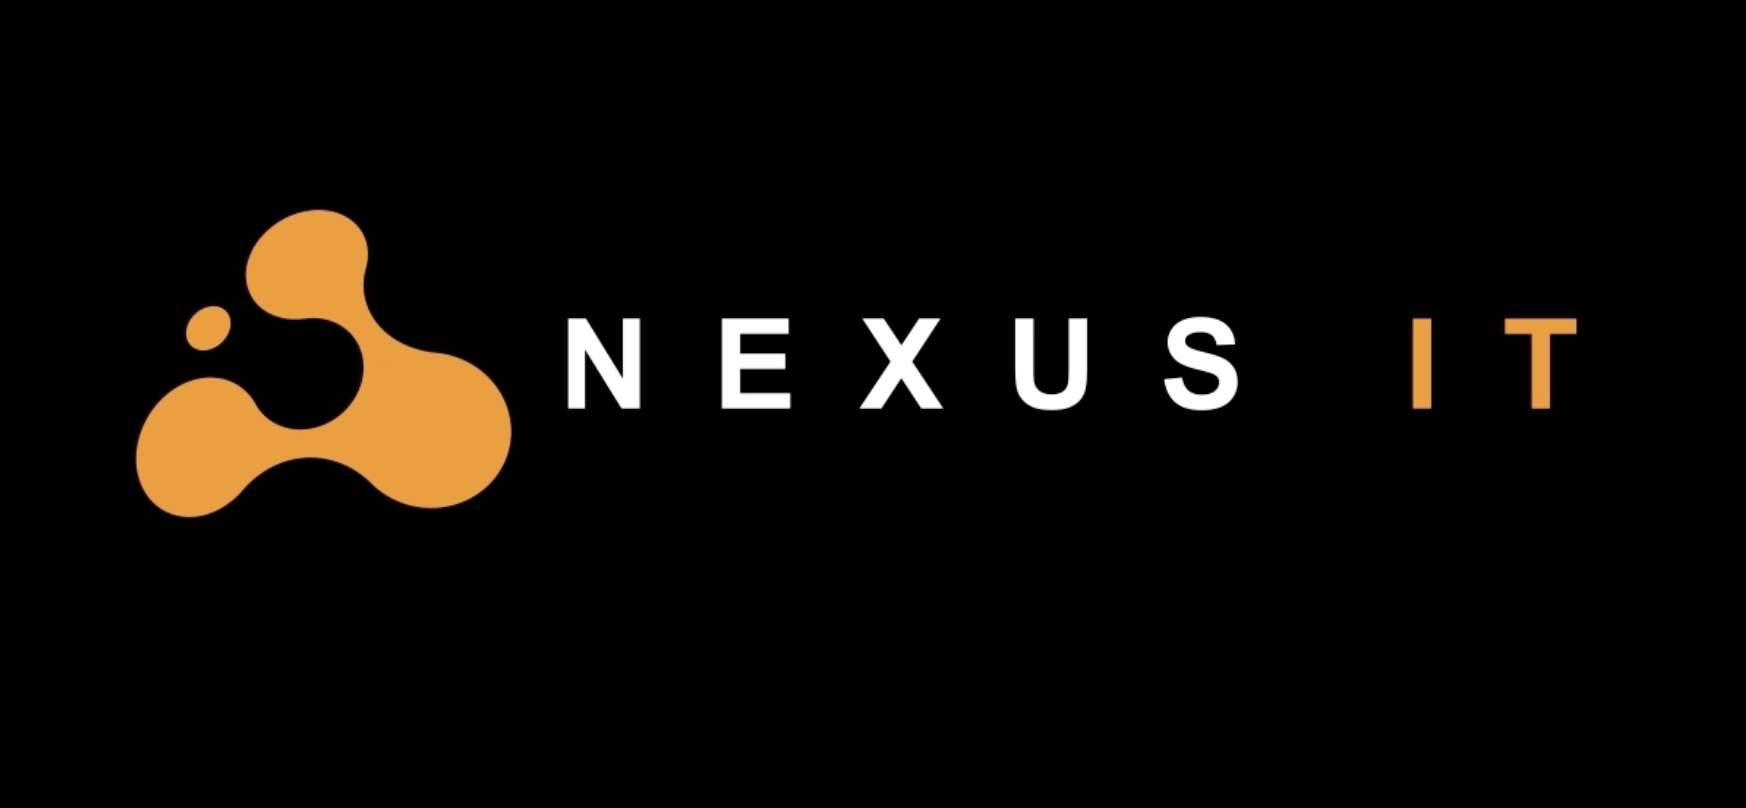 Nexus IT: Cultivating a People-First Culture for Success